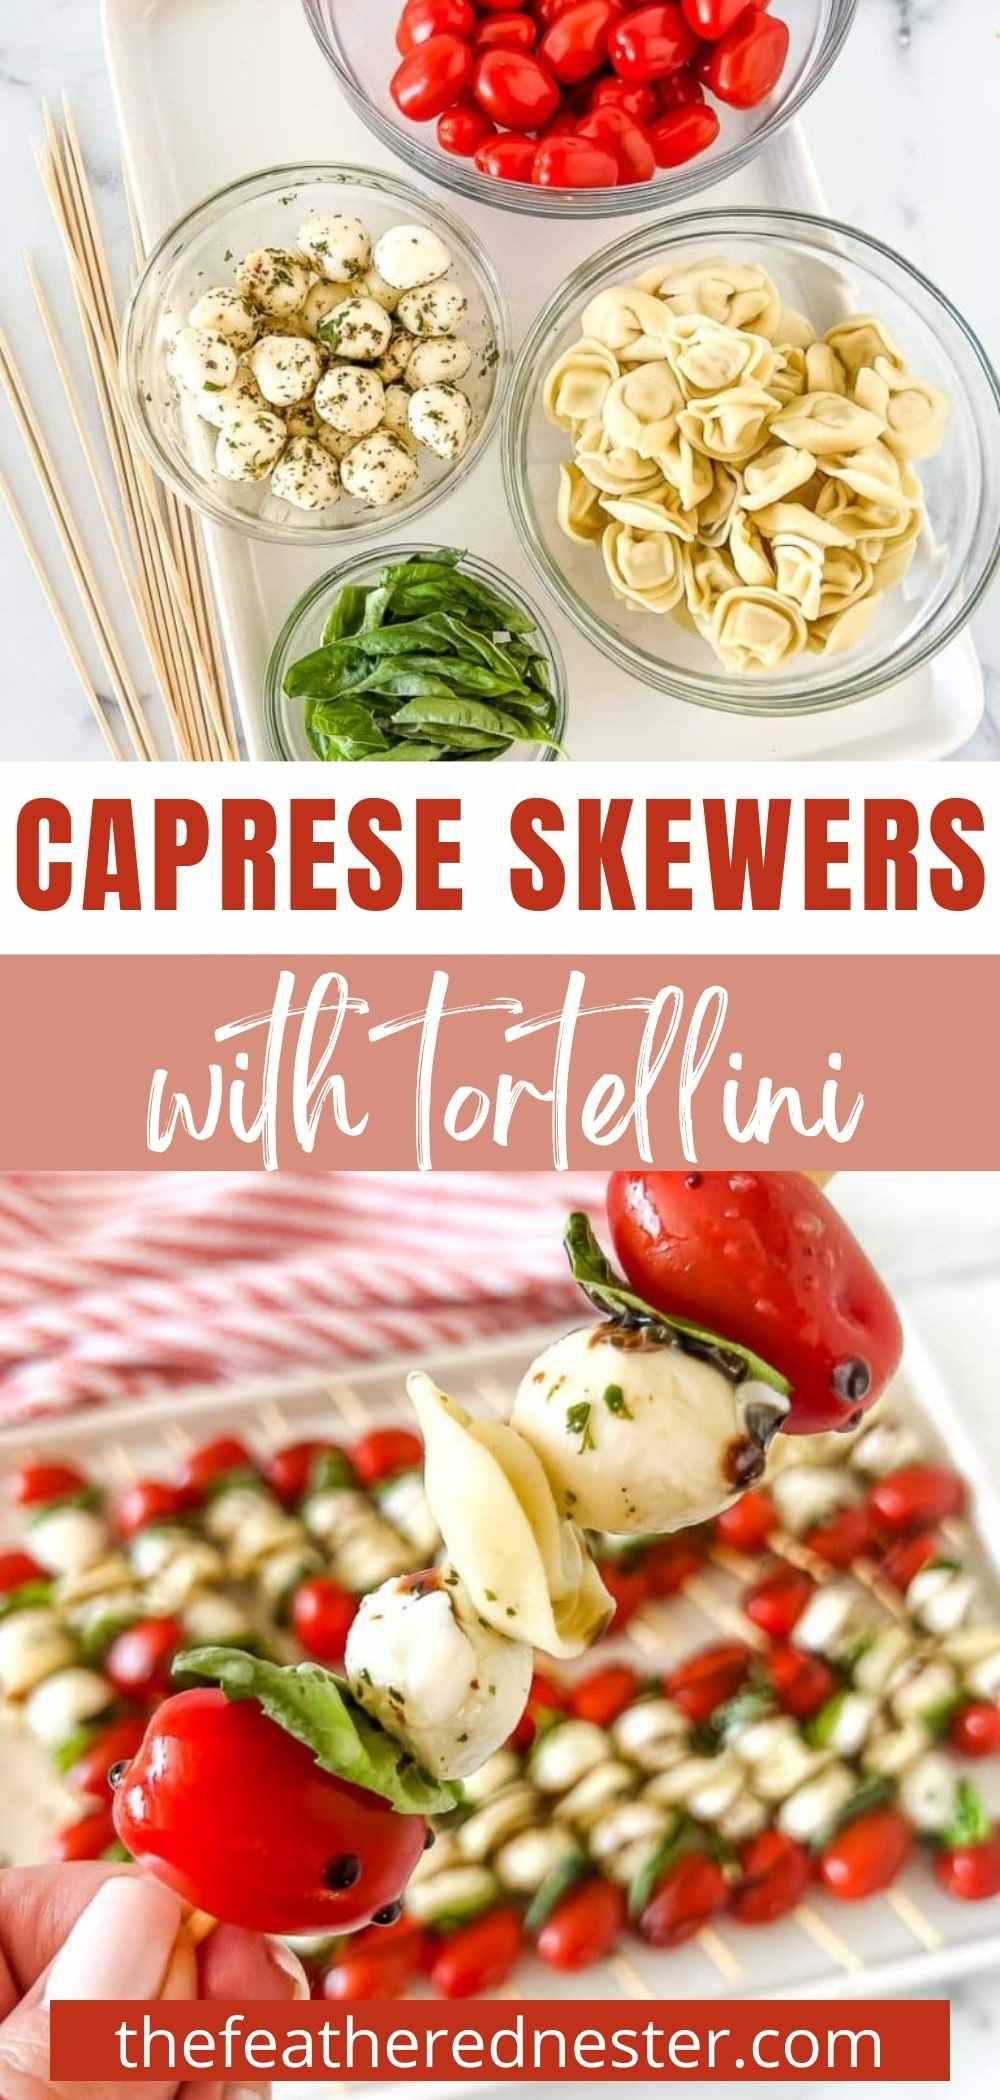 Tortellini Caprese Skewers - The Feathered Nester